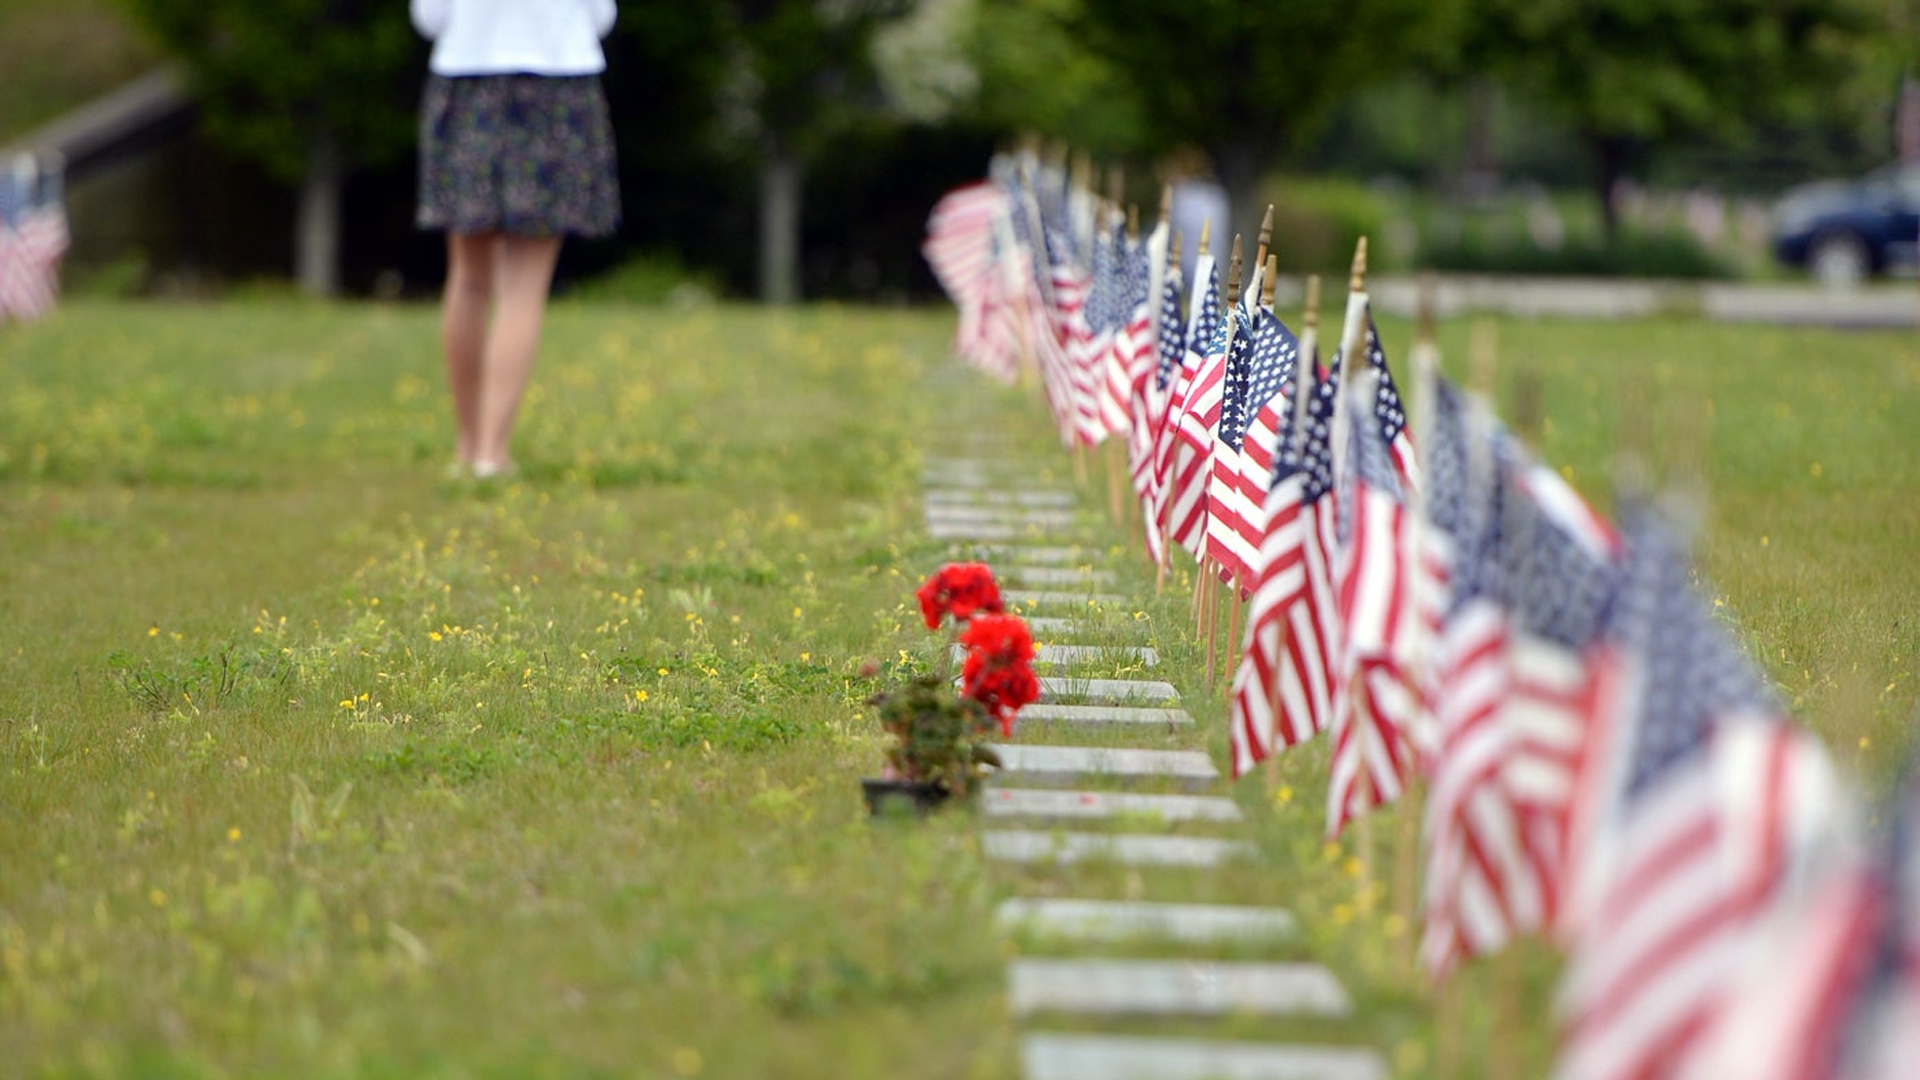 We want to hear from you What does Memorial Day mean to you?